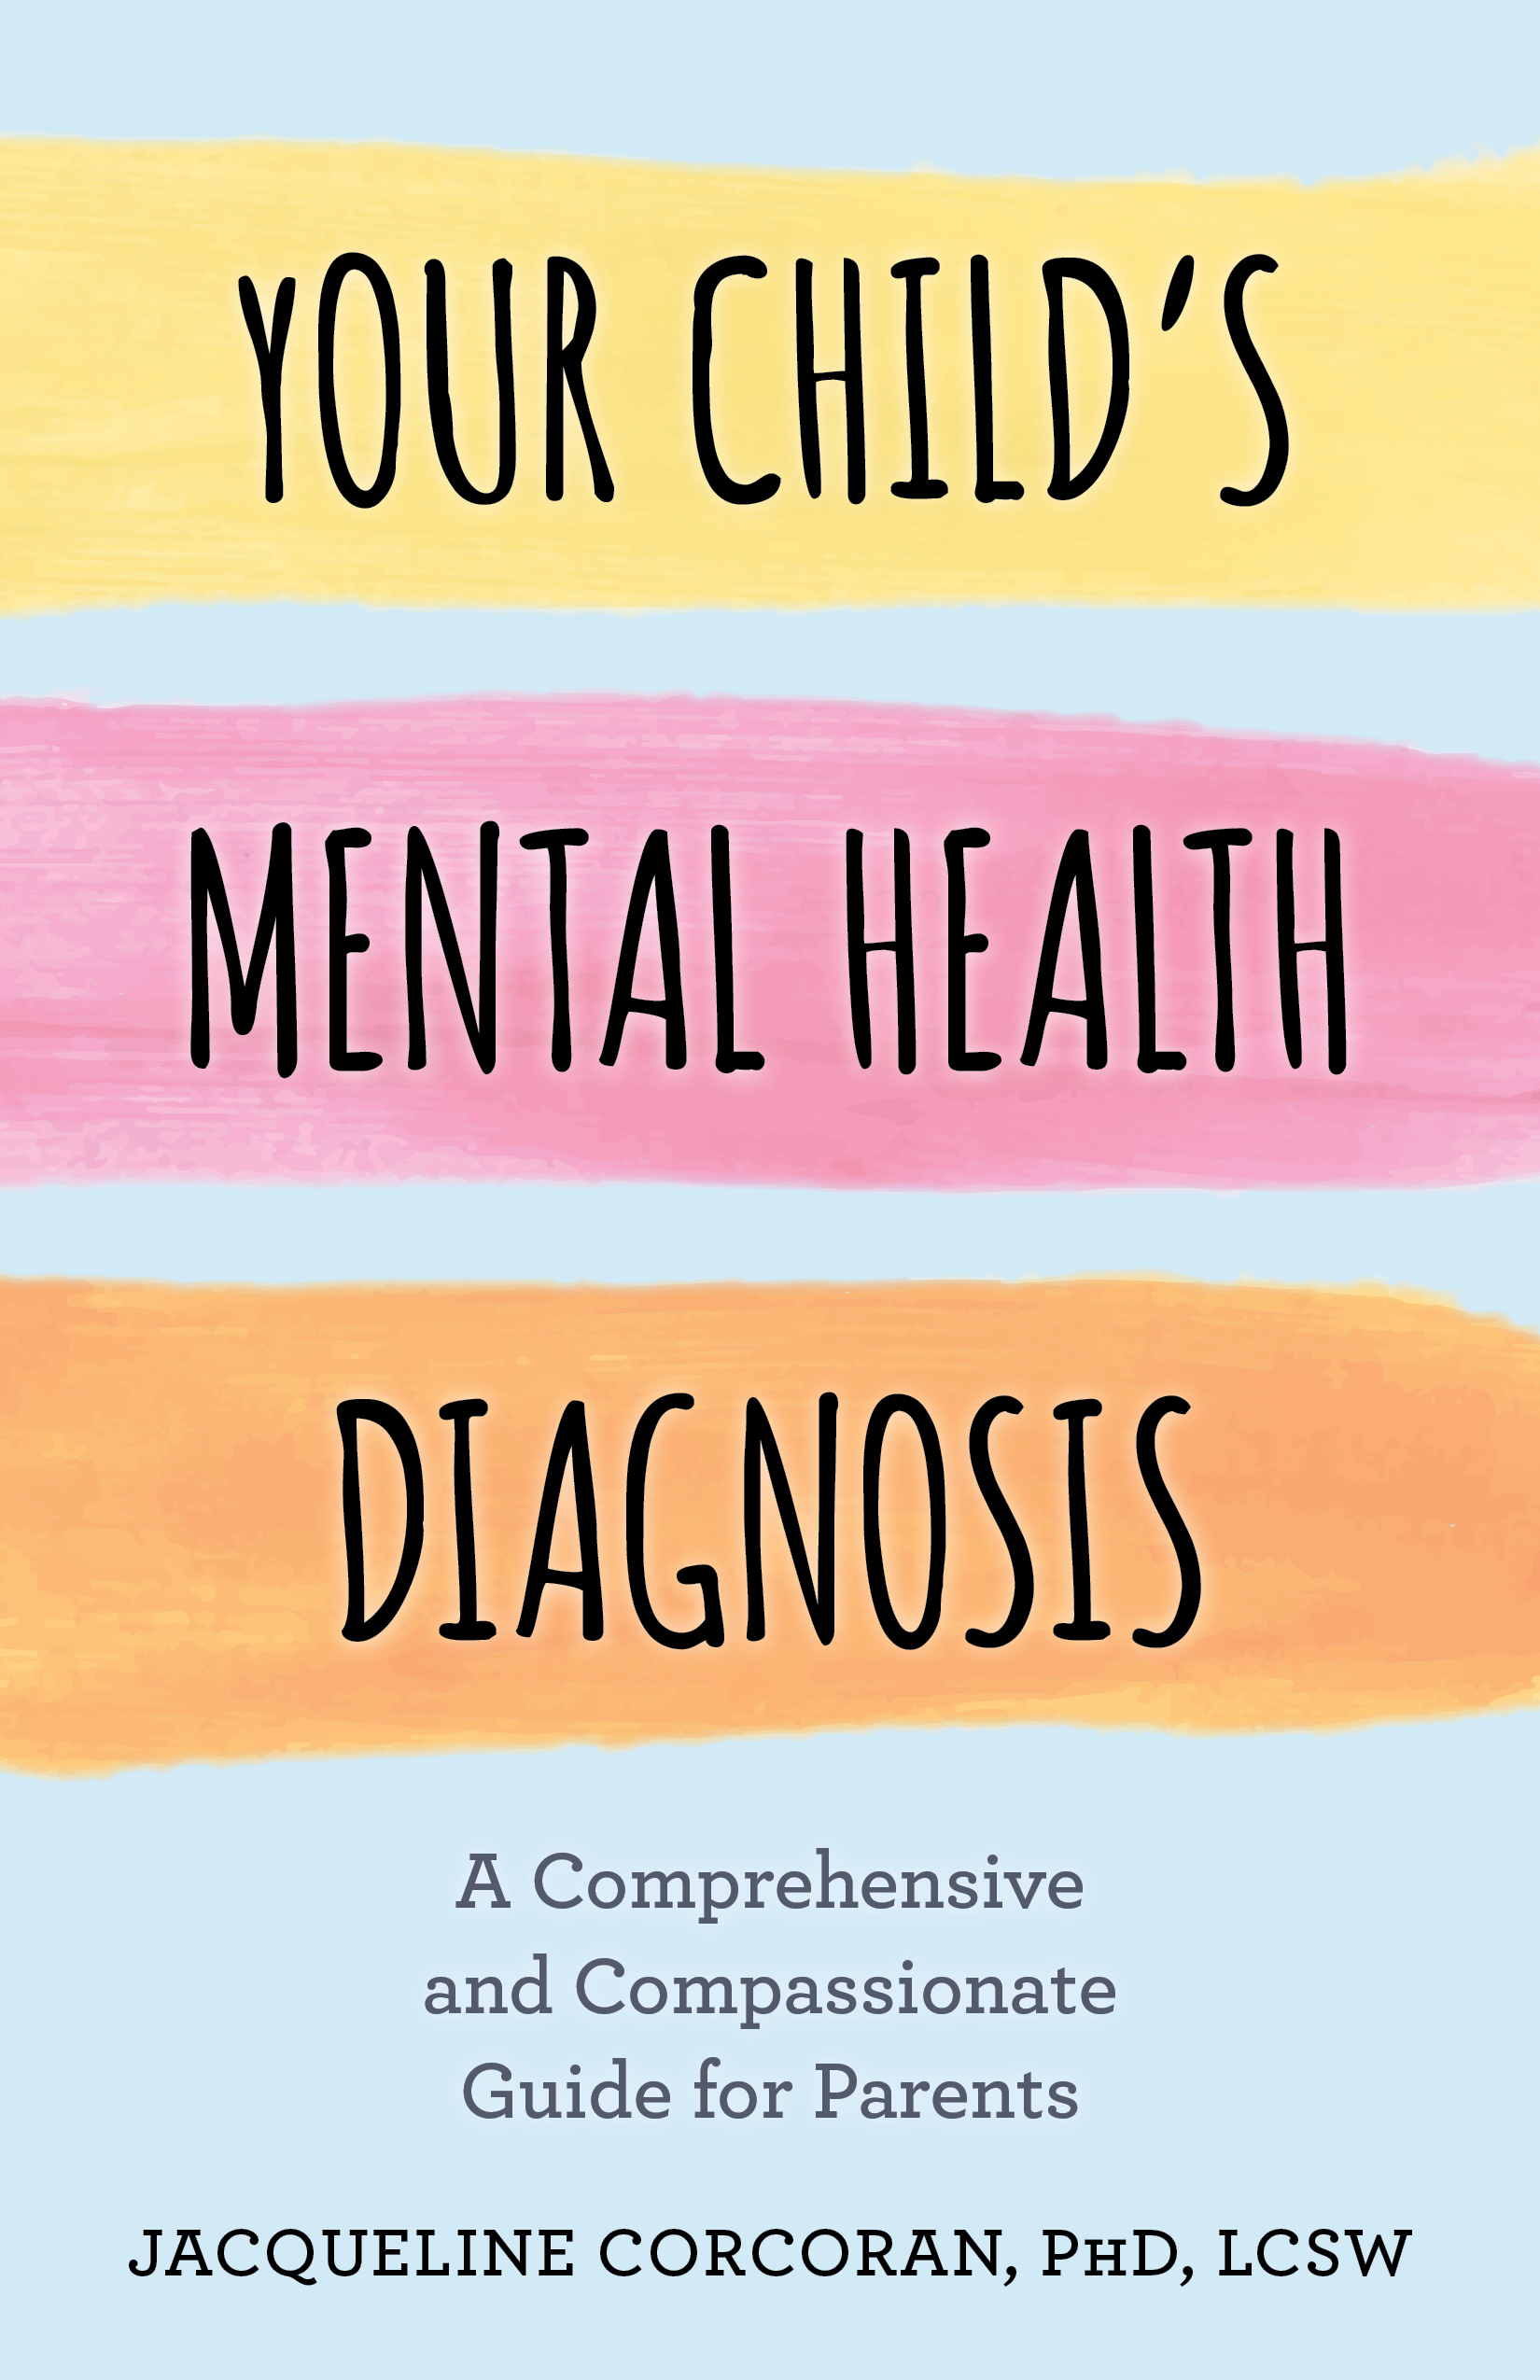 Your Child's Mental Health Diagnosis: A Comprehensive and Compassionate Guide for Parents